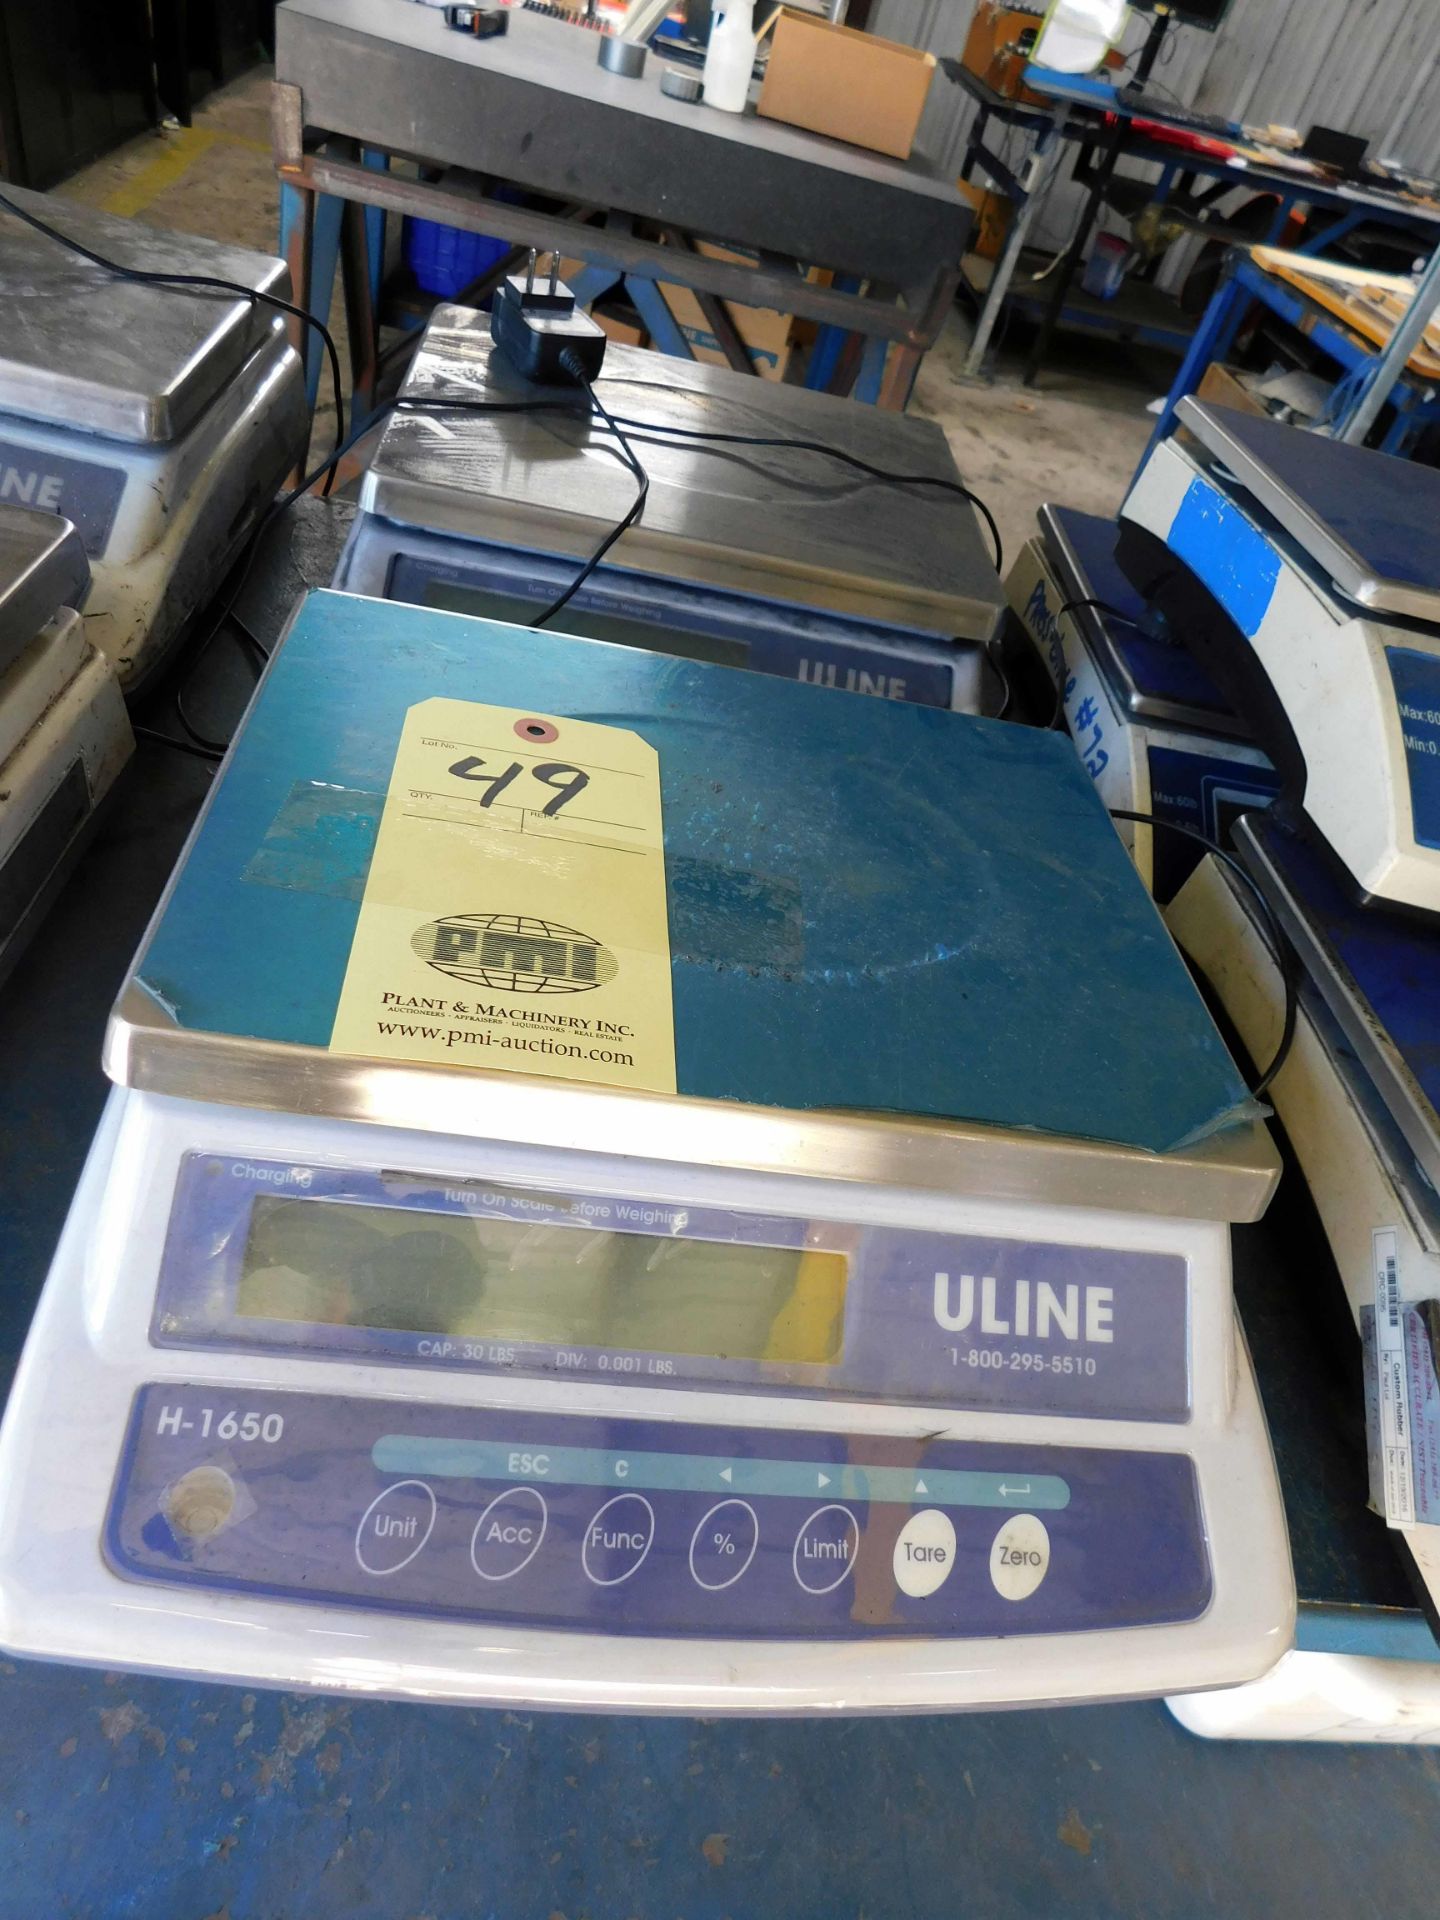 LOT OF COUNTING SCALES (2), U-LINE MDL. H-1650